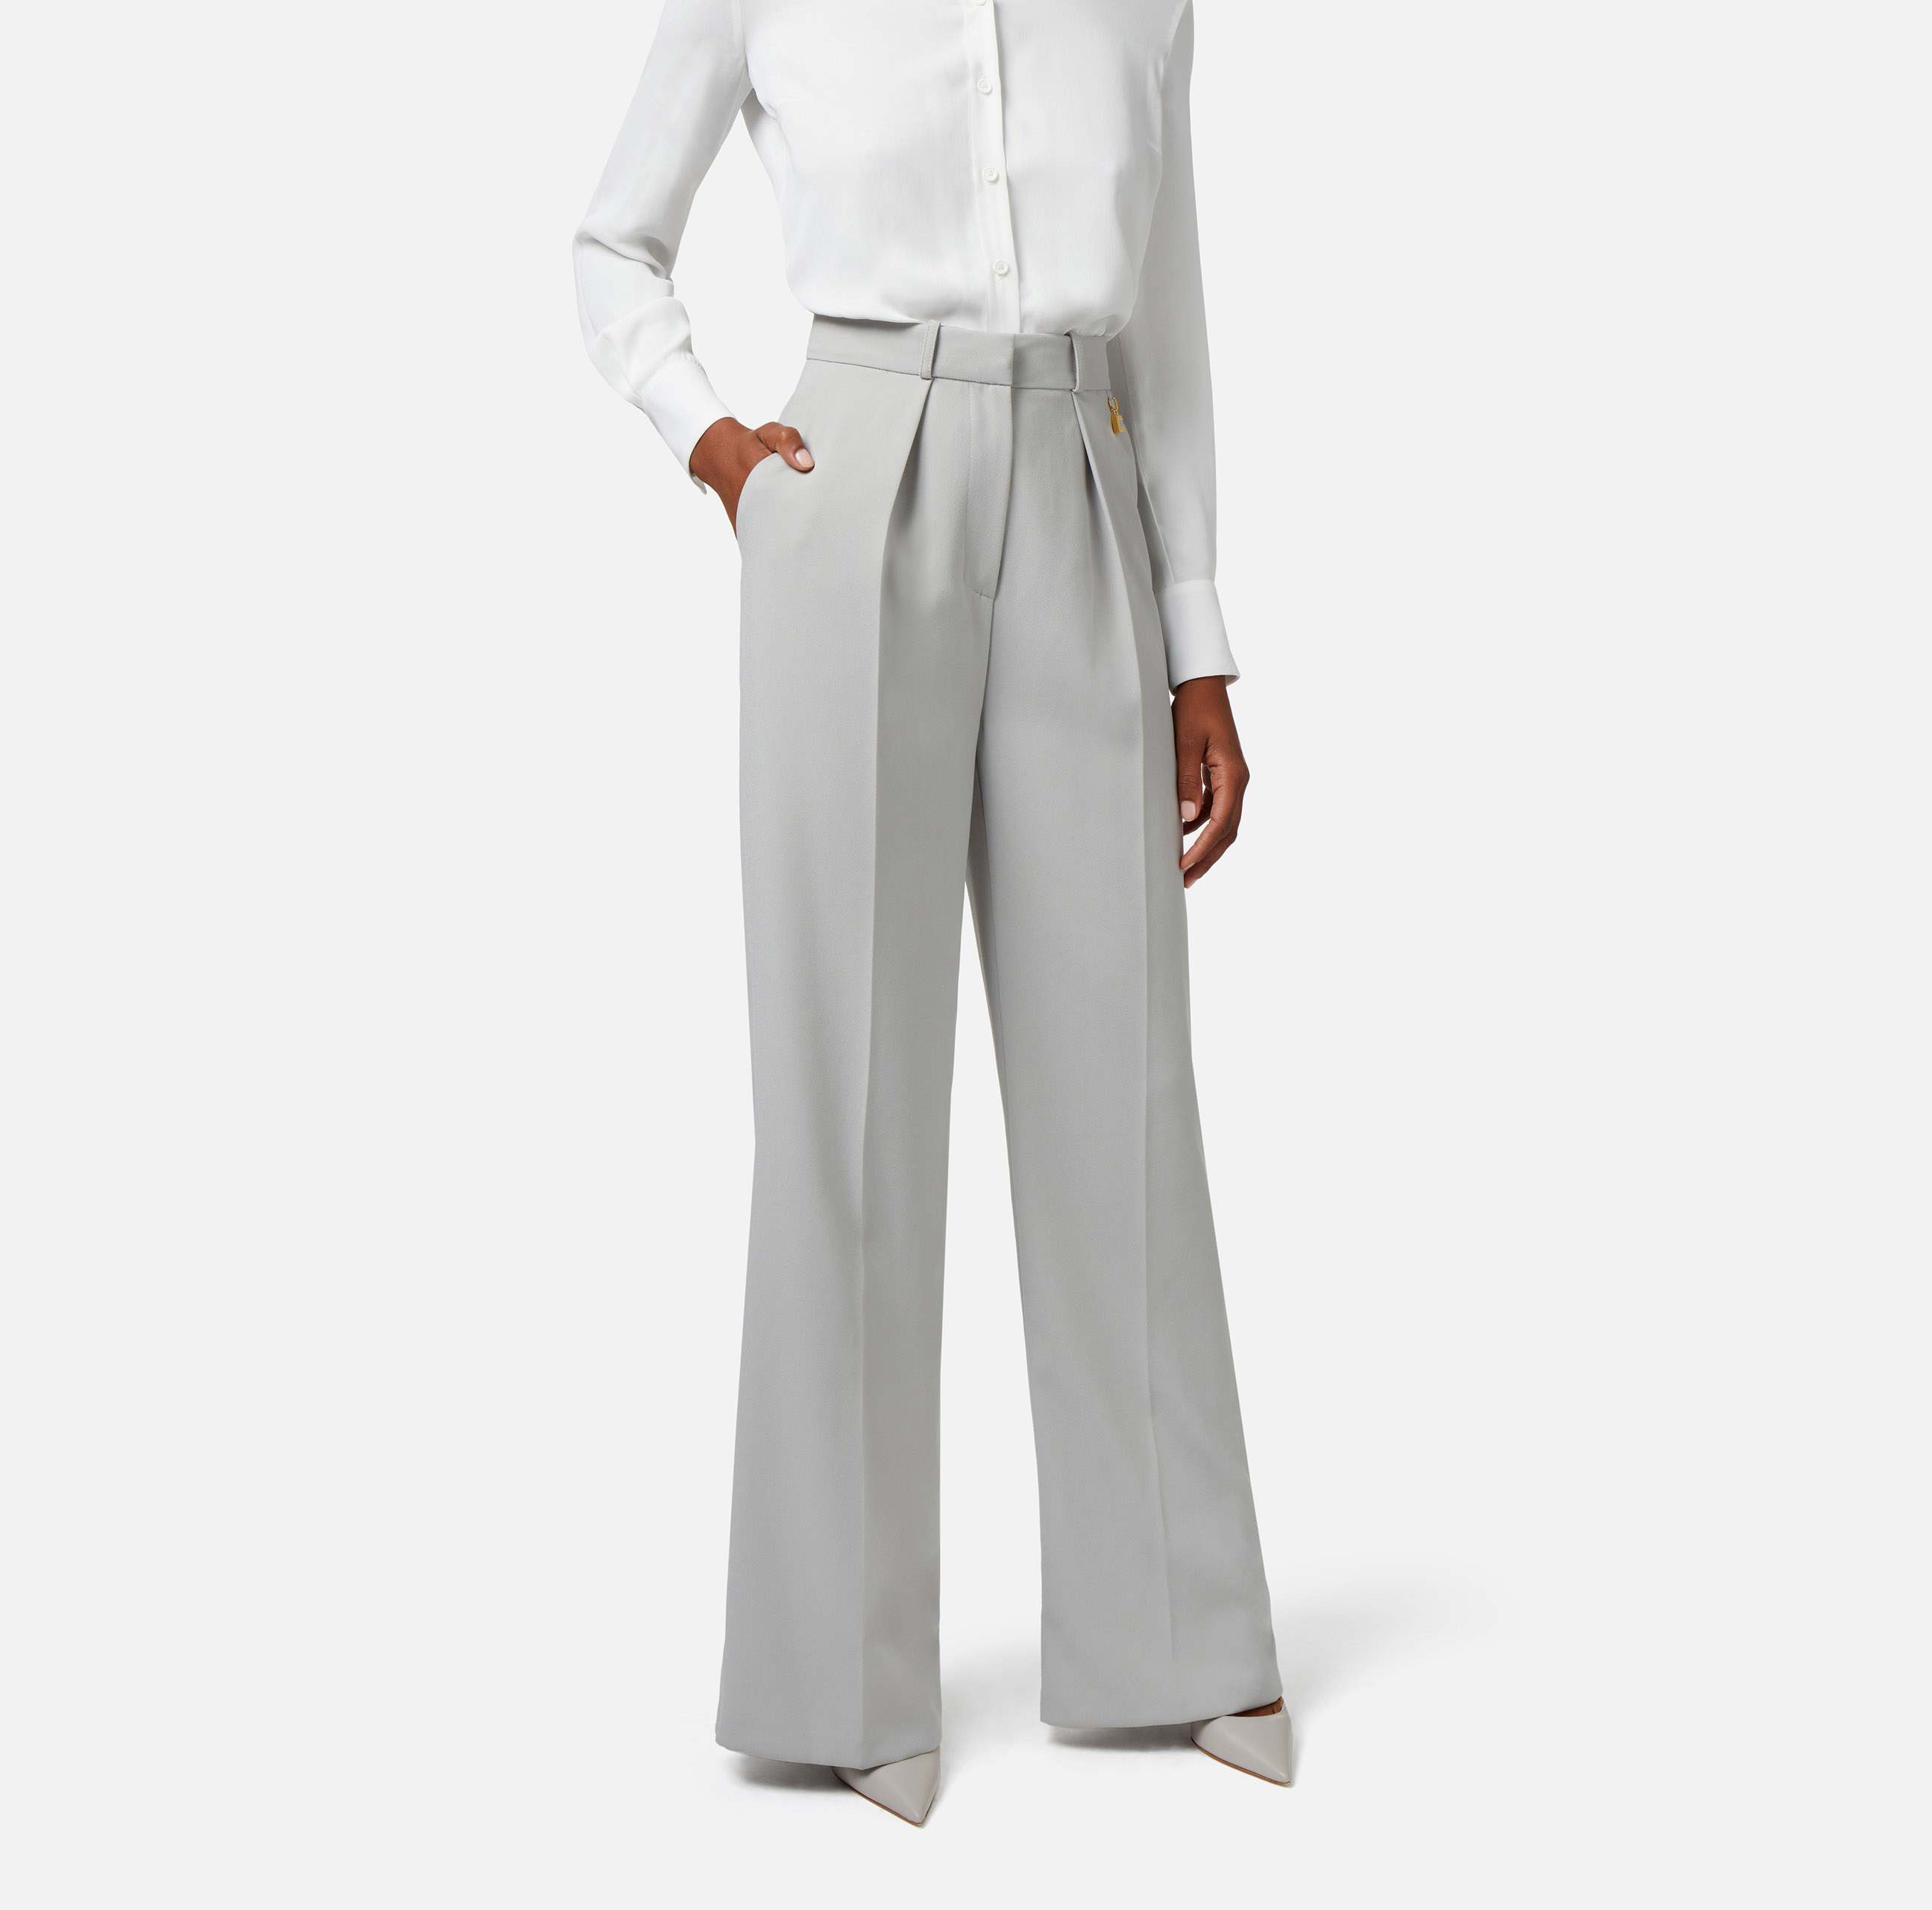 Straight trousers in woven crêpe fabric with darts - Elisabetta Franchi